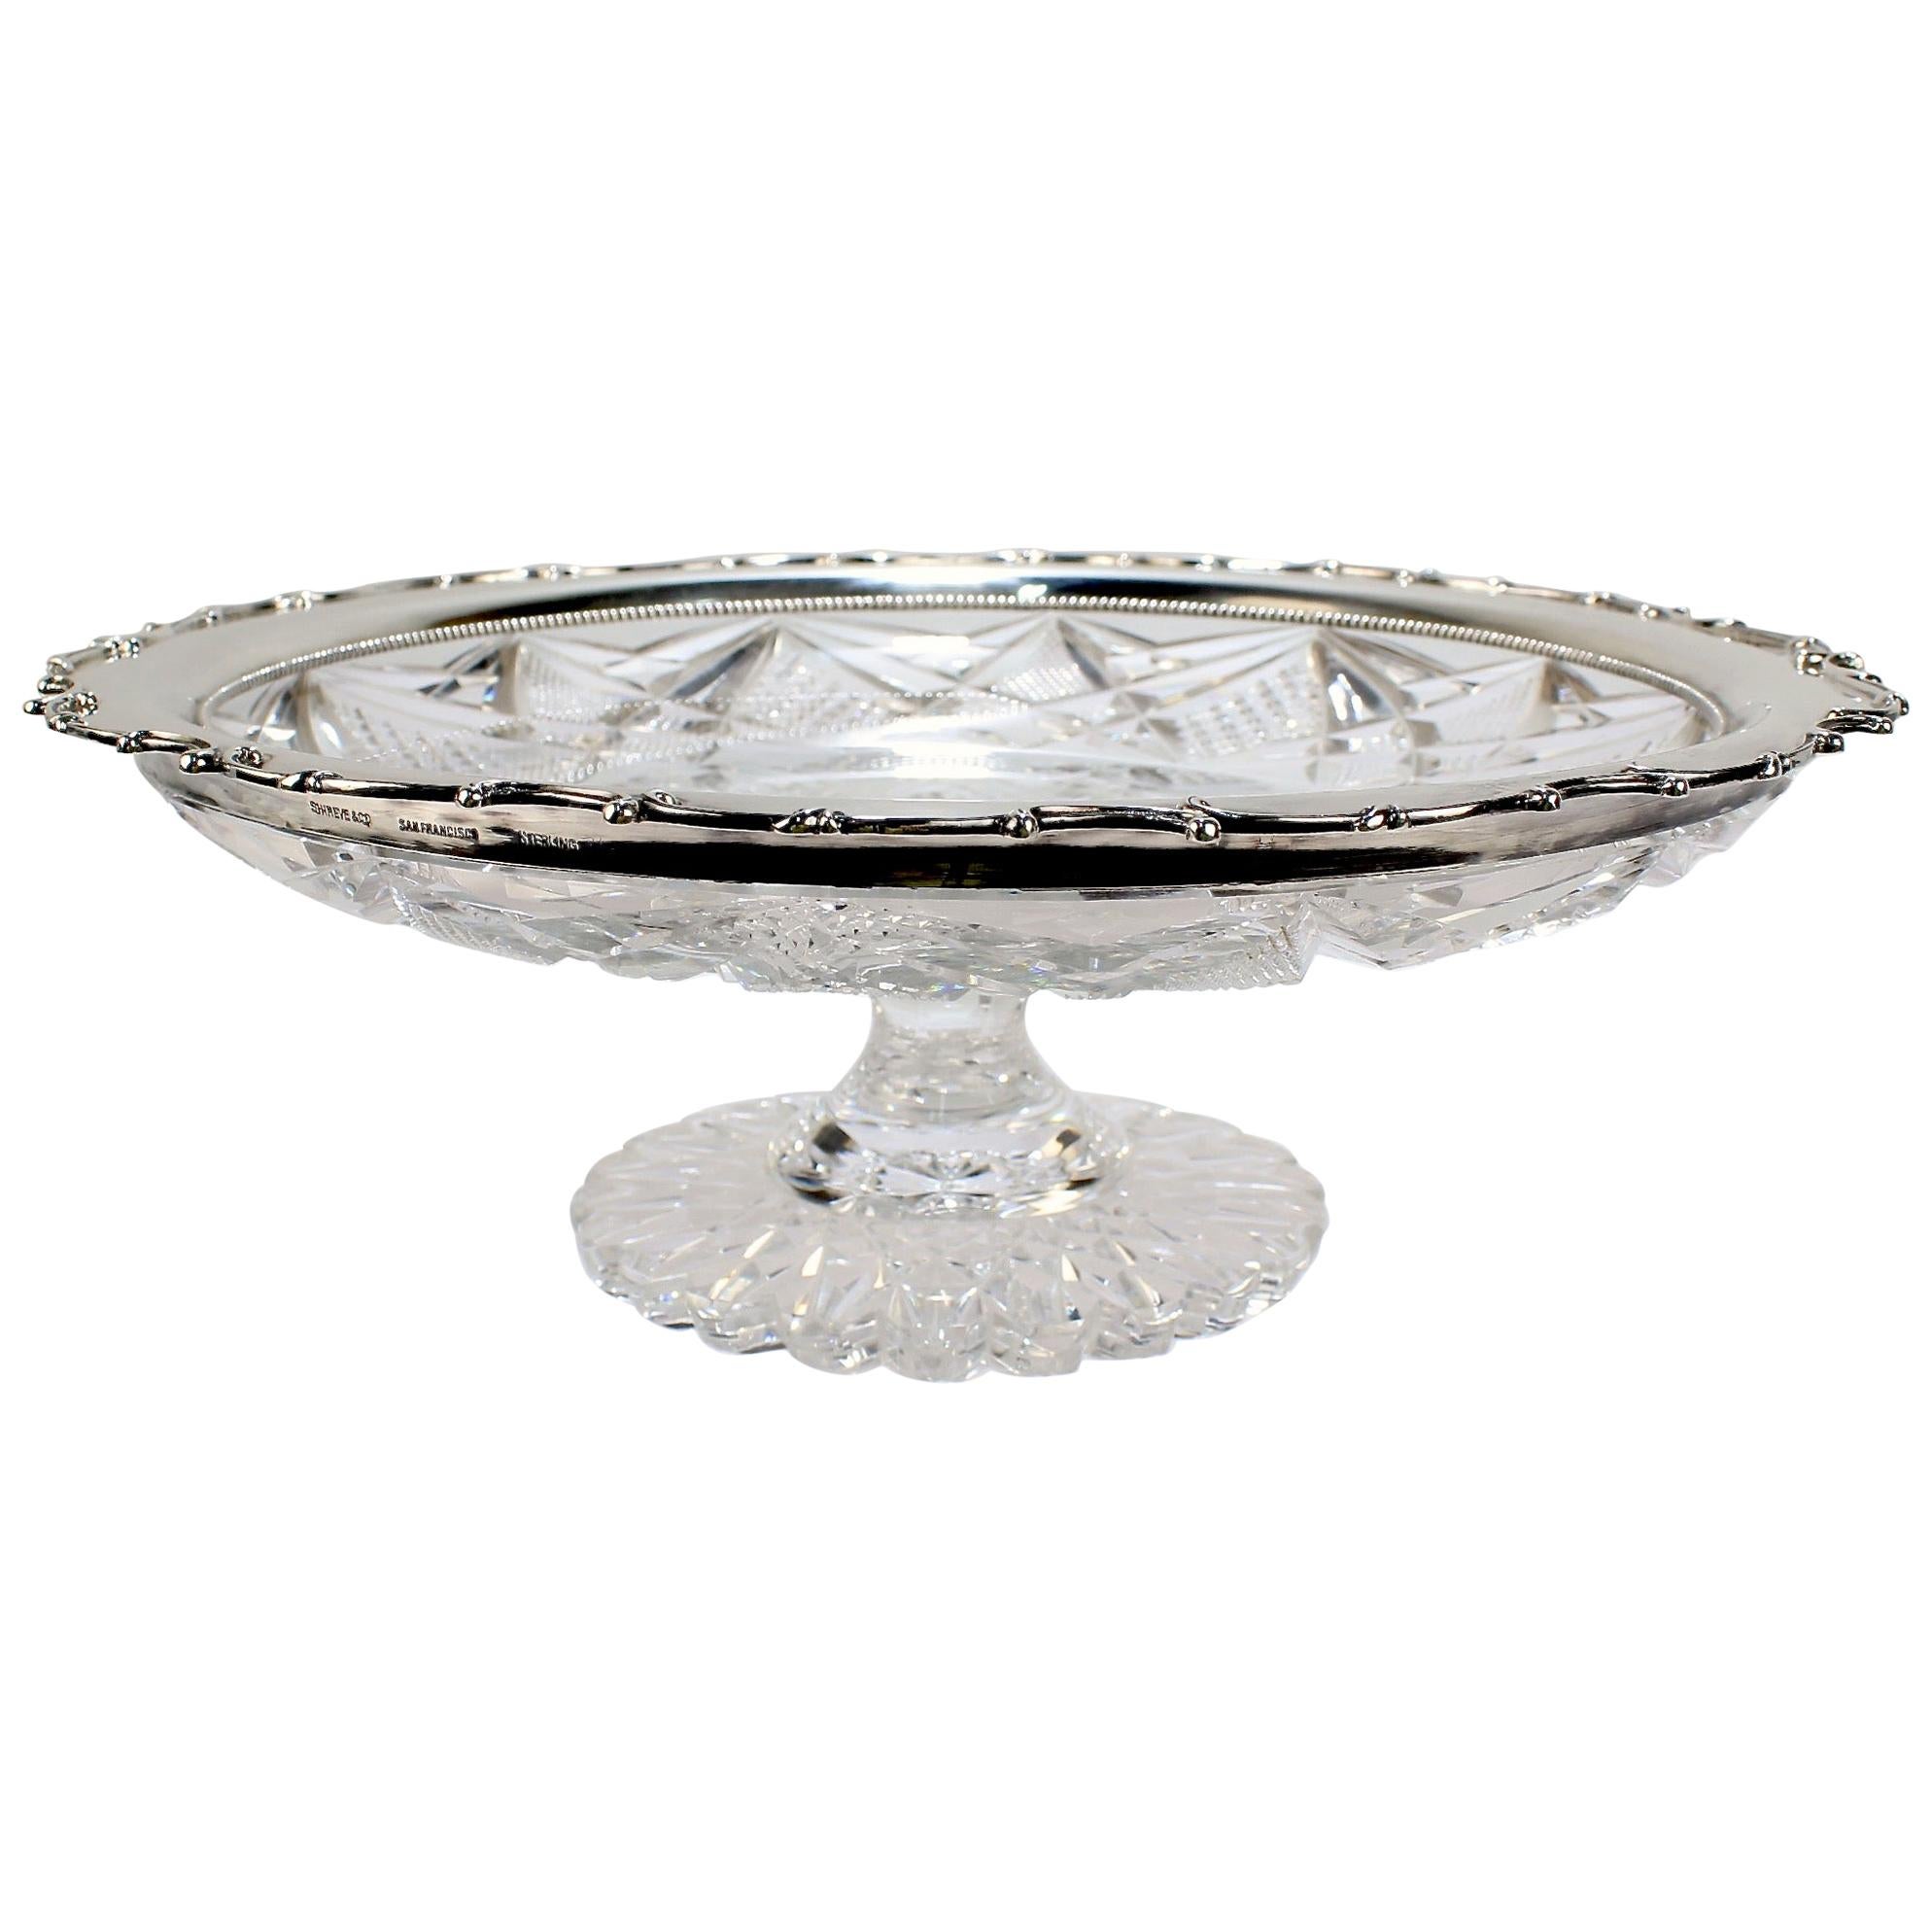 Shreve Sterling Silver Mounted American Brilliant Period Cut Glass Compote